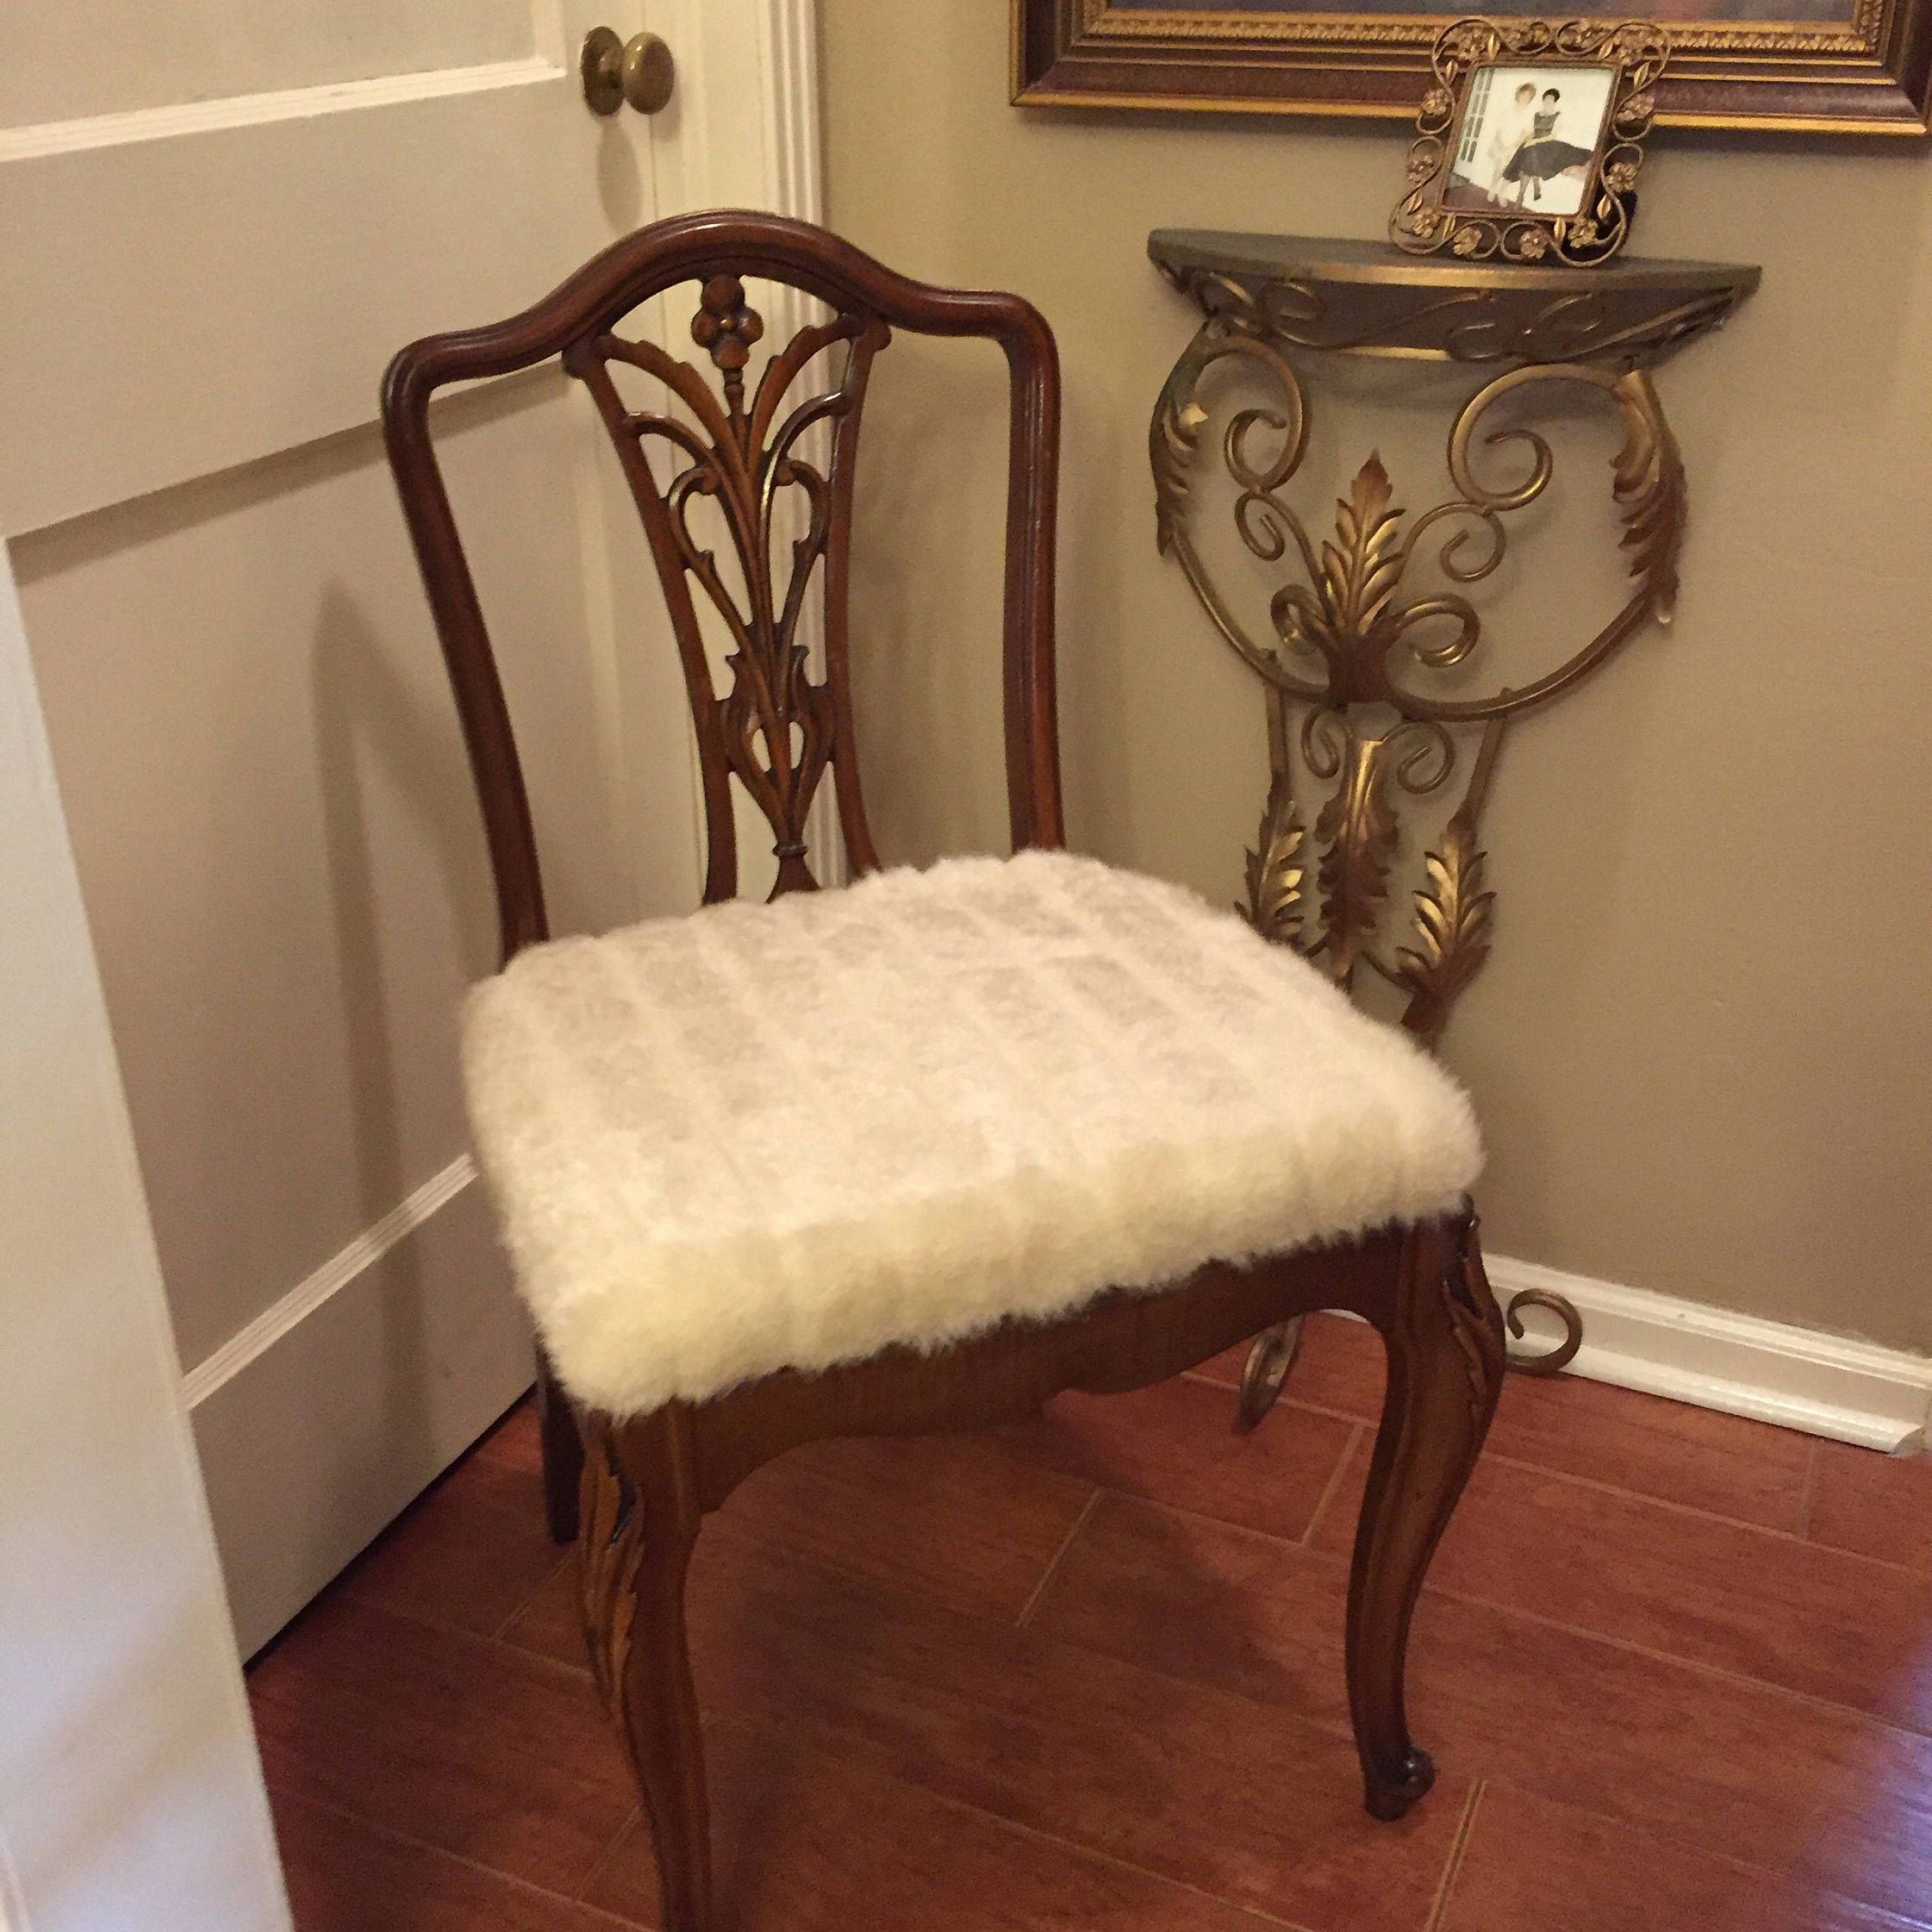 Etsy For Current Cream And Gold Hardwood Vanity Seats (View 1 of 10)